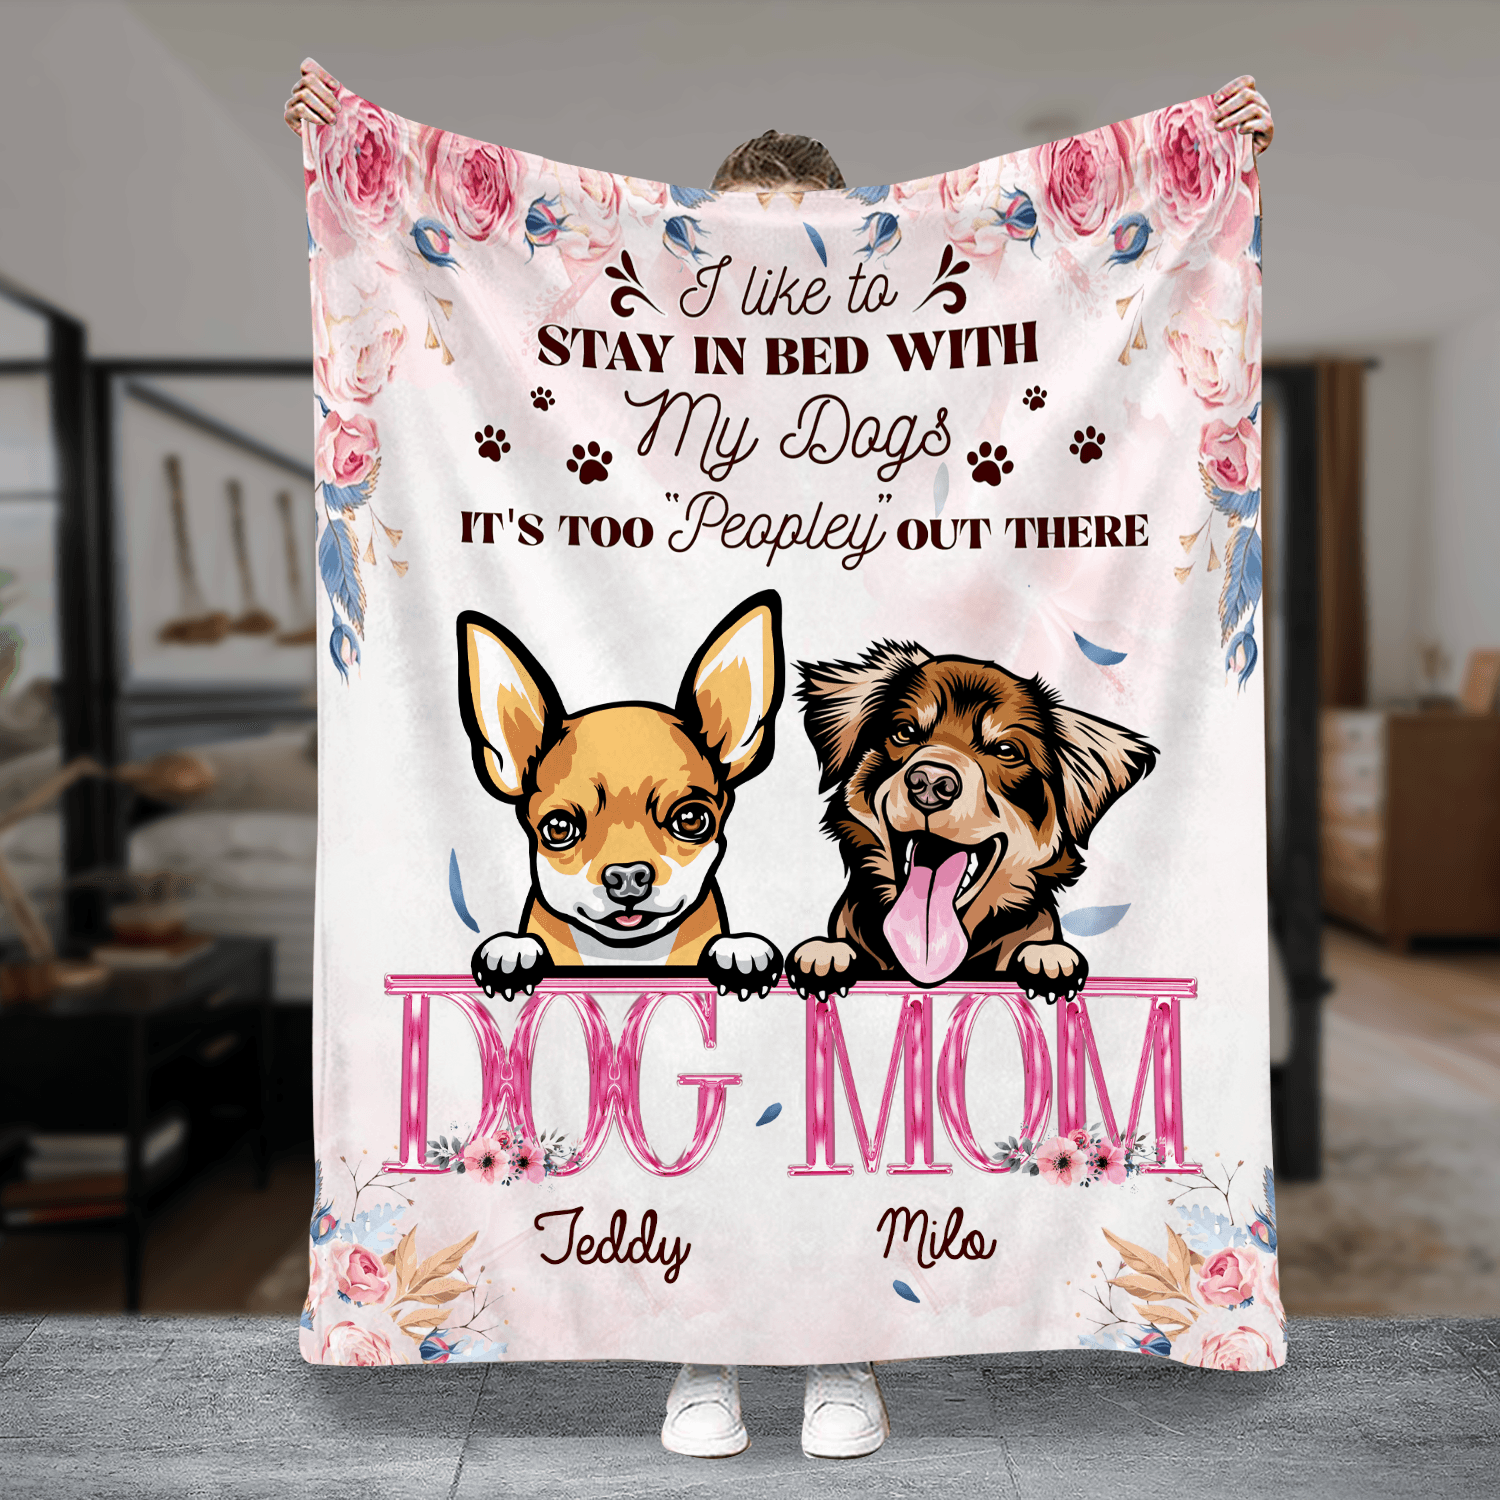 CHIHUAHUA Mom Dog Mother Mother's Day Gift Poster for Sale by